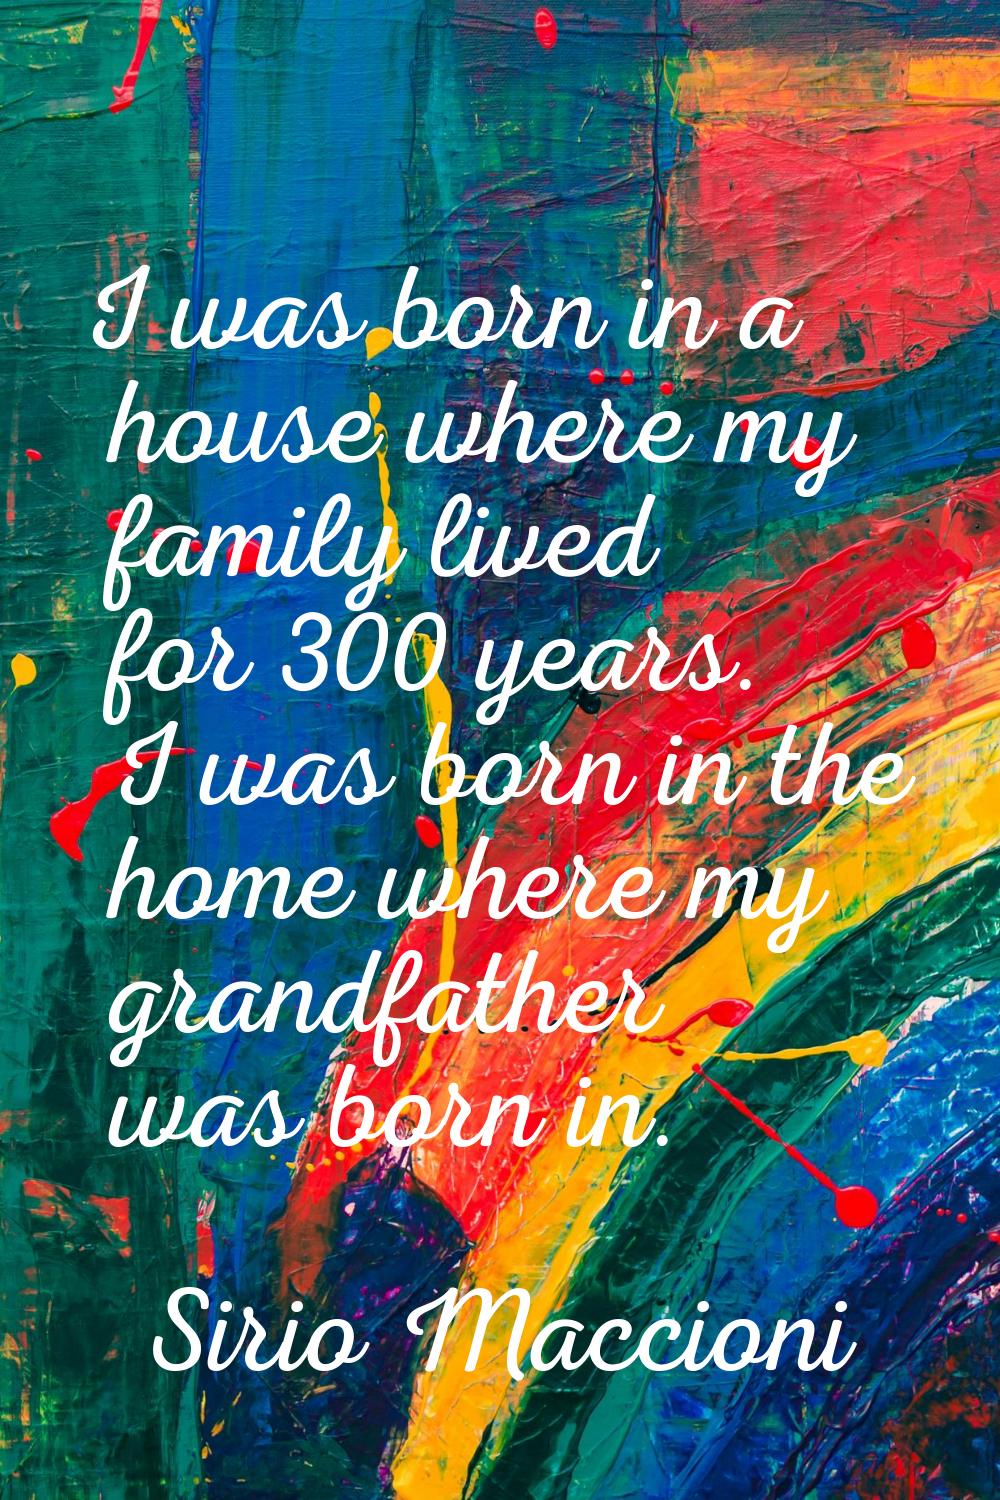 I was born in a house where my family lived for 300 years. I was born in the home where my grandfat